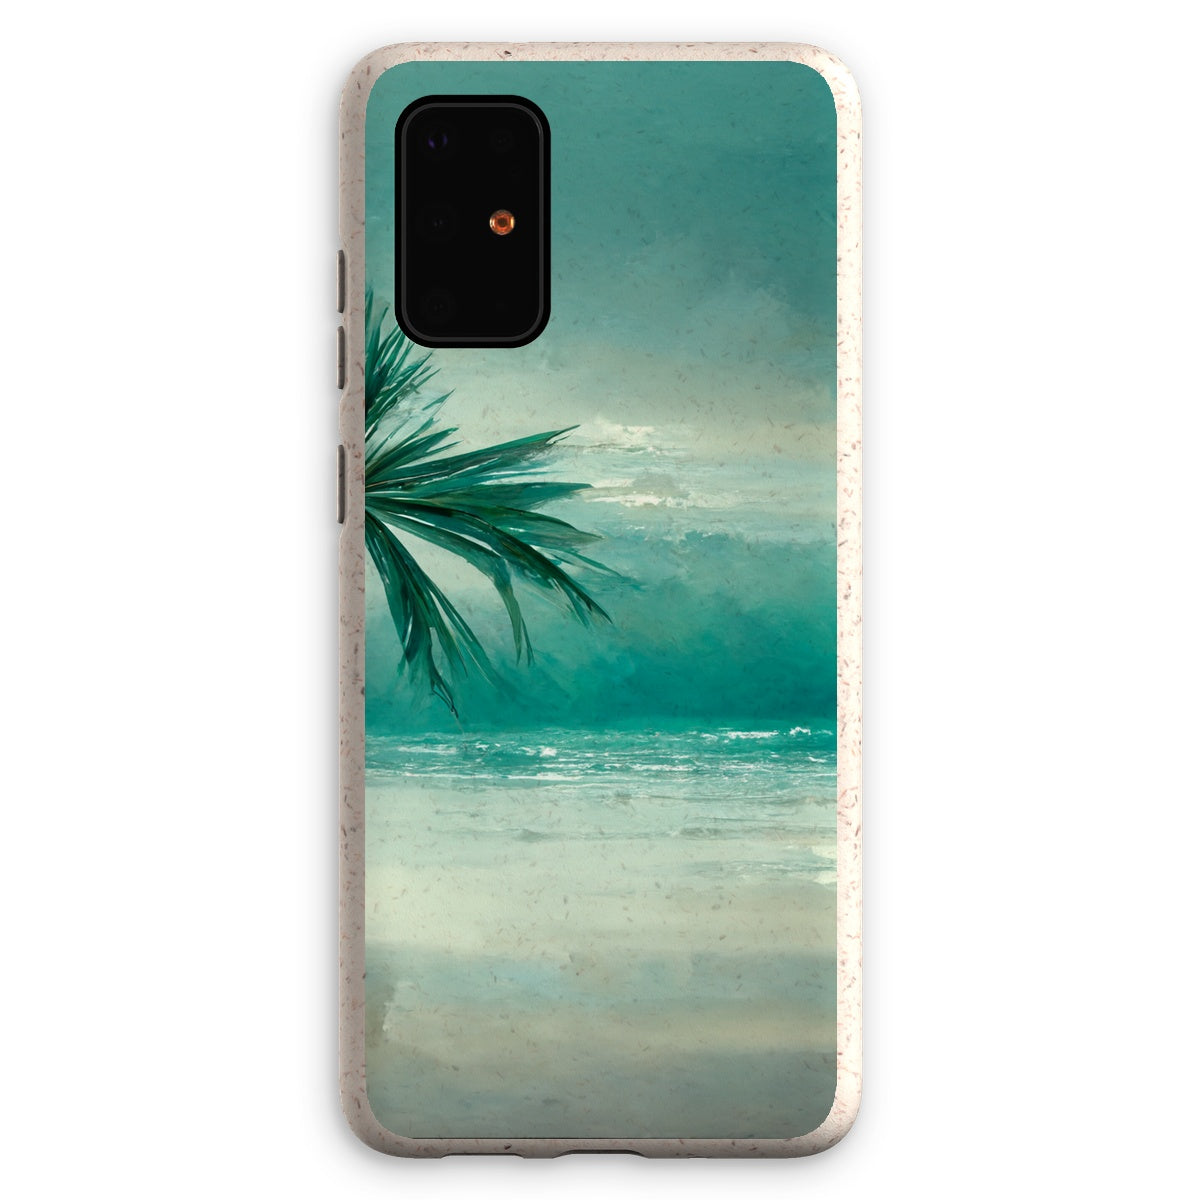 Lonesome Palm Eco Phone Case